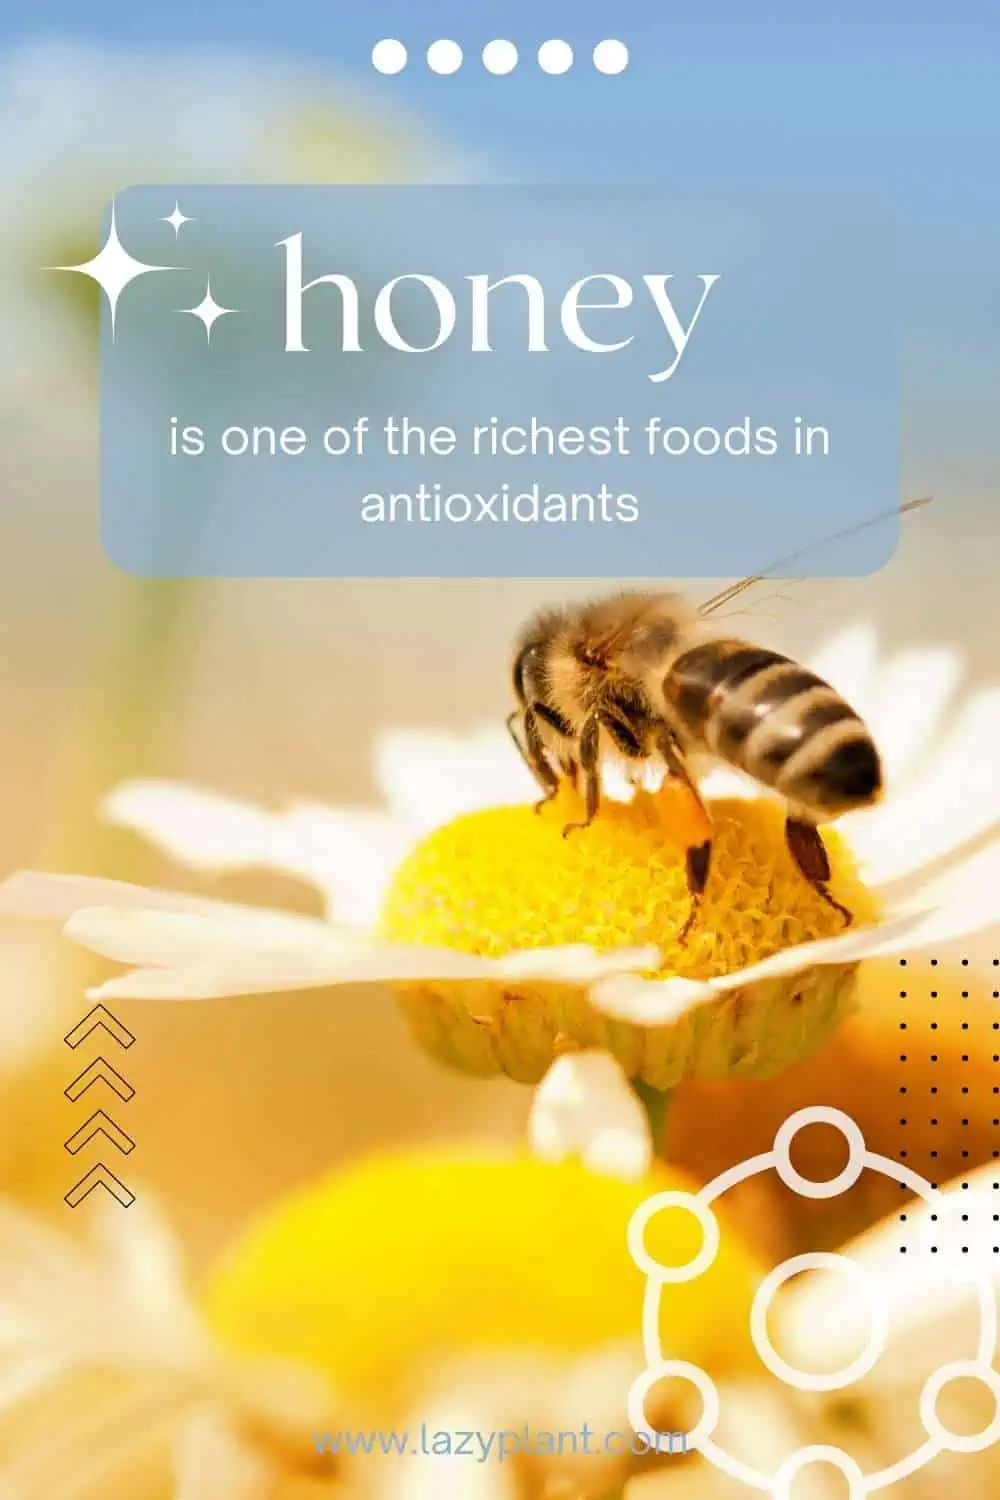 Honey has more than 200 polyphenol compounds!